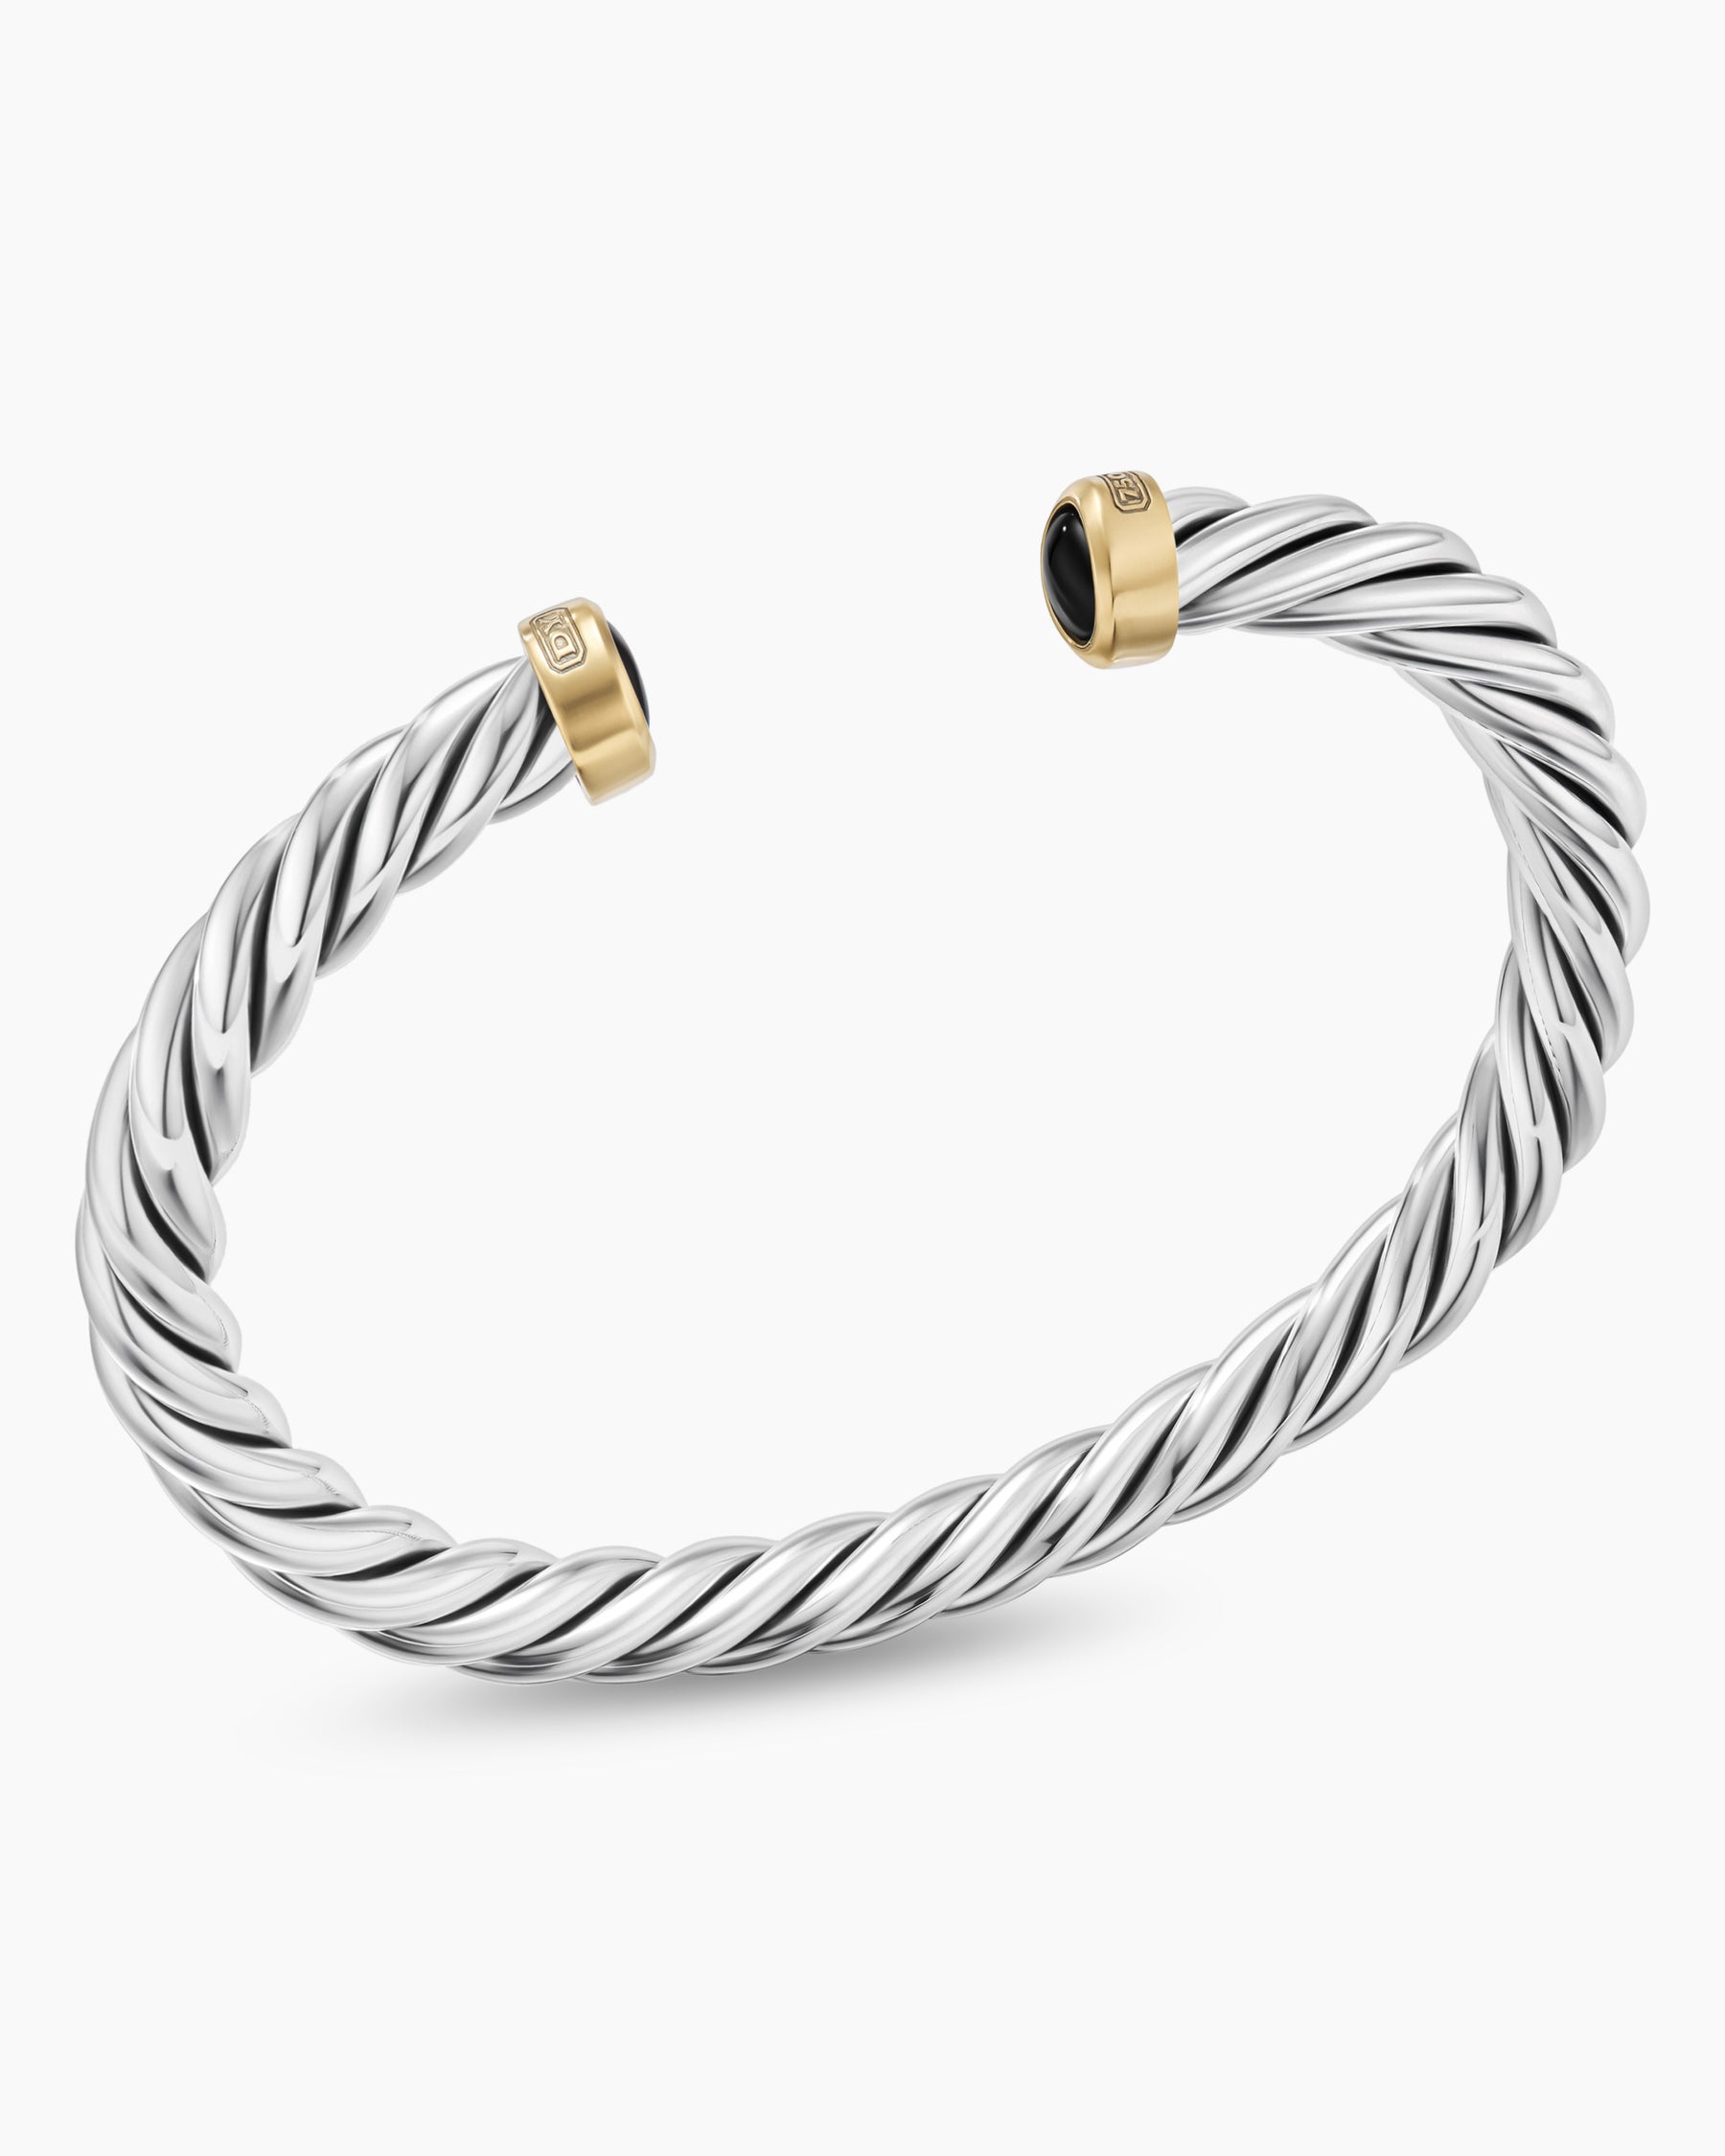 Gold, | Cable Silver David Yurman Bracelet Yellow in Cuff 18K 6mm Sterling with